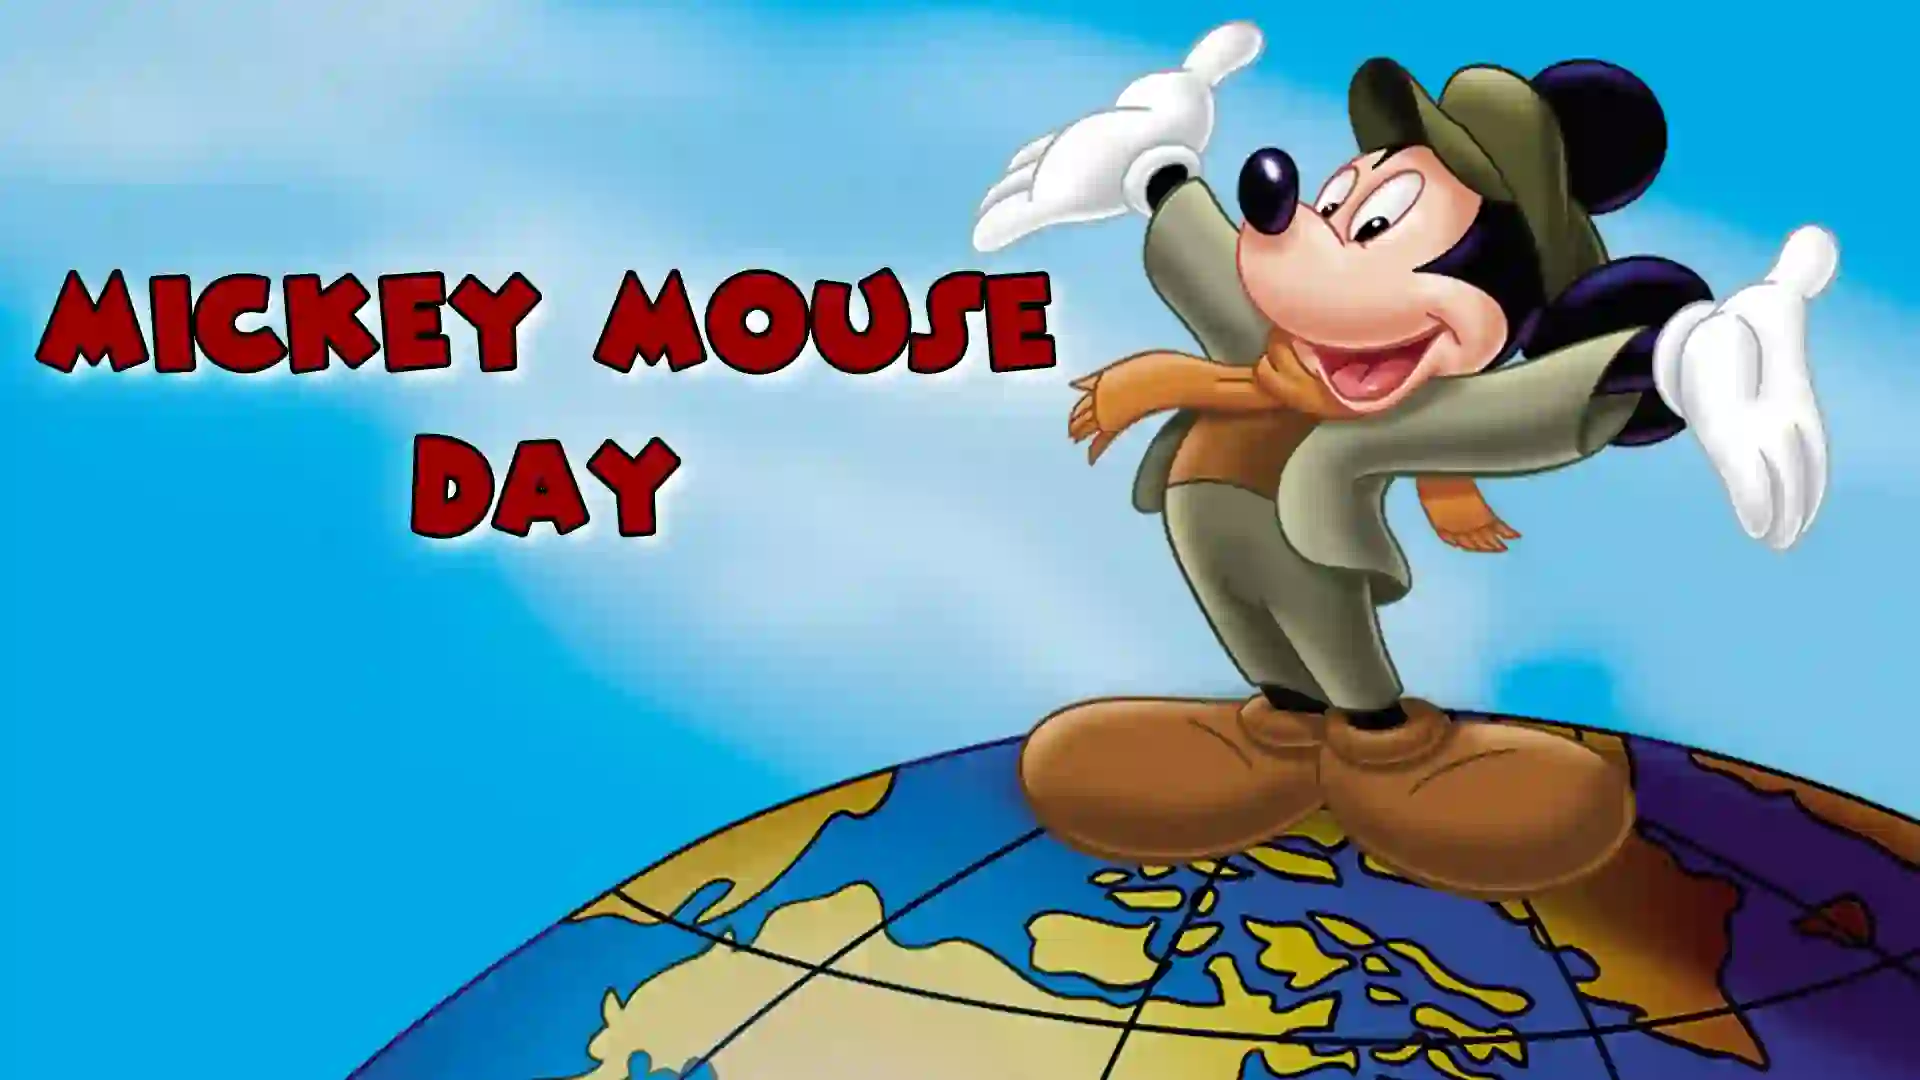 Mickey mouse day This Post Design By The Revolution Deshbhakt Hindustani